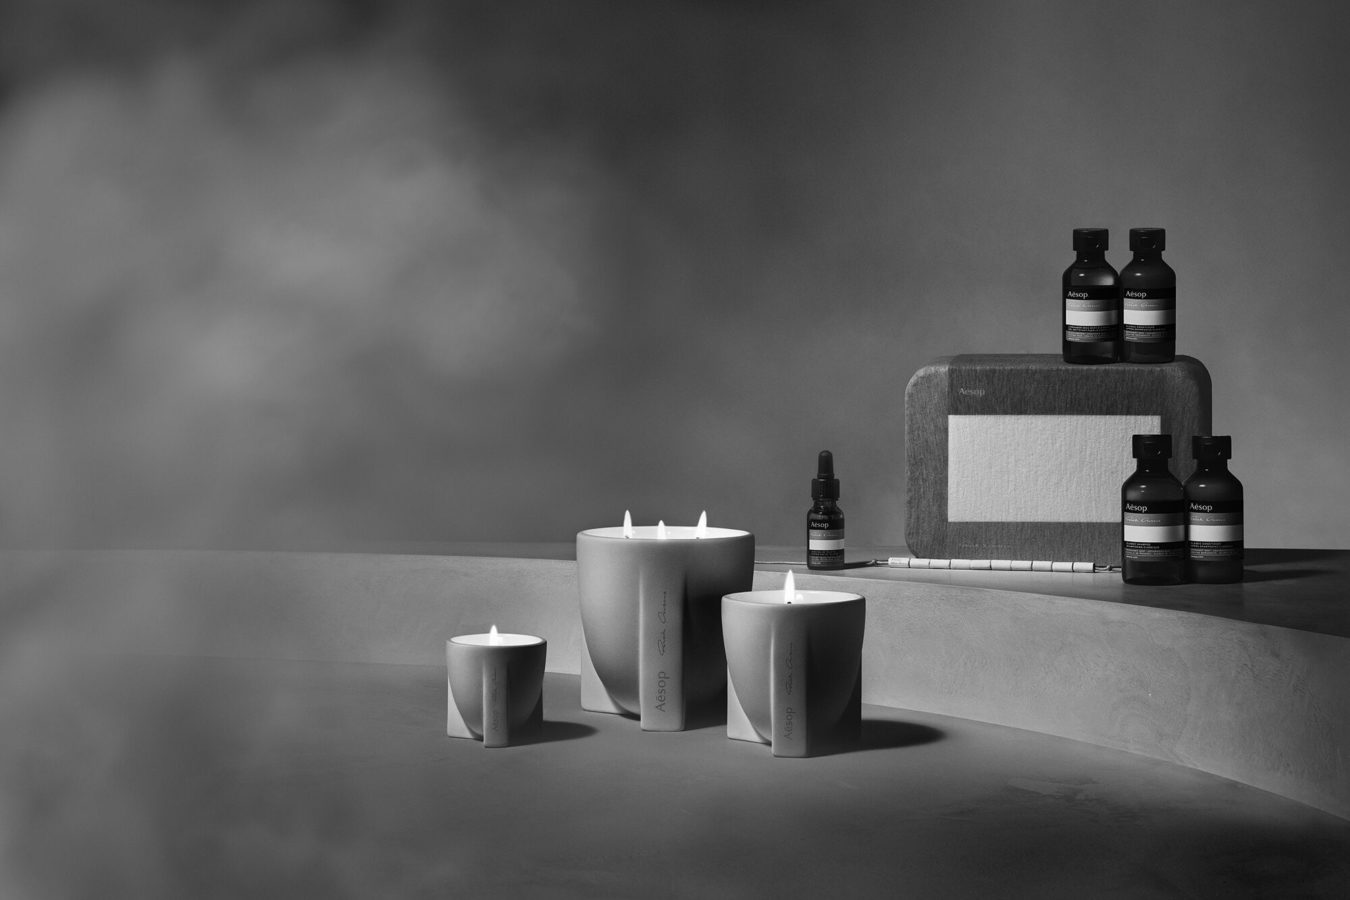 Have you seen Aesop and Rick Owens’ limited-edition collection?